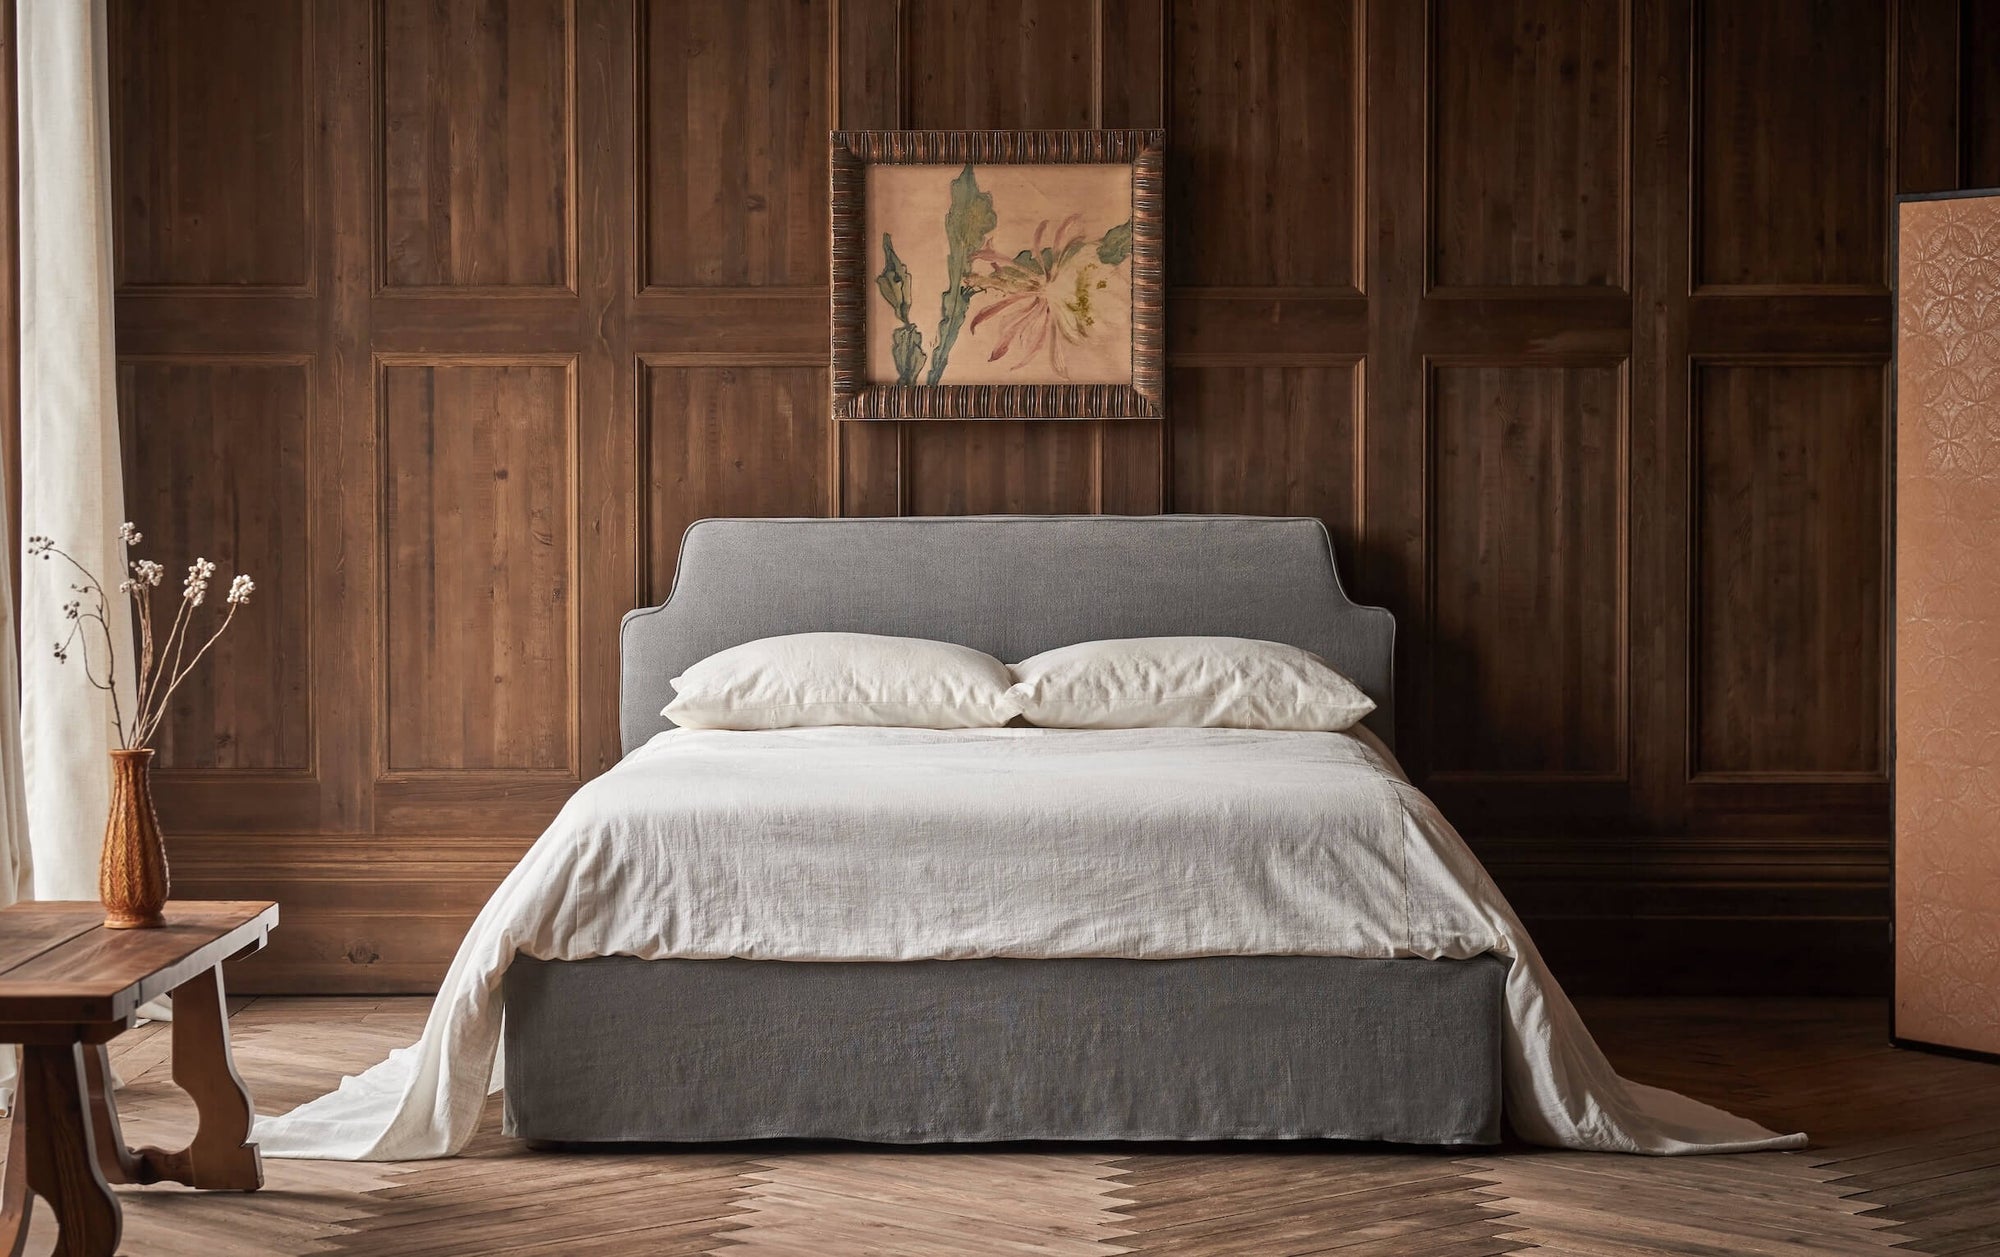 Amelia Bed in Ink Cap, a medium cool grey Light Weight Linen, made with white bed linens and placed In a wood paneled room with a Leona Dining Bench holding a vase of flowers.